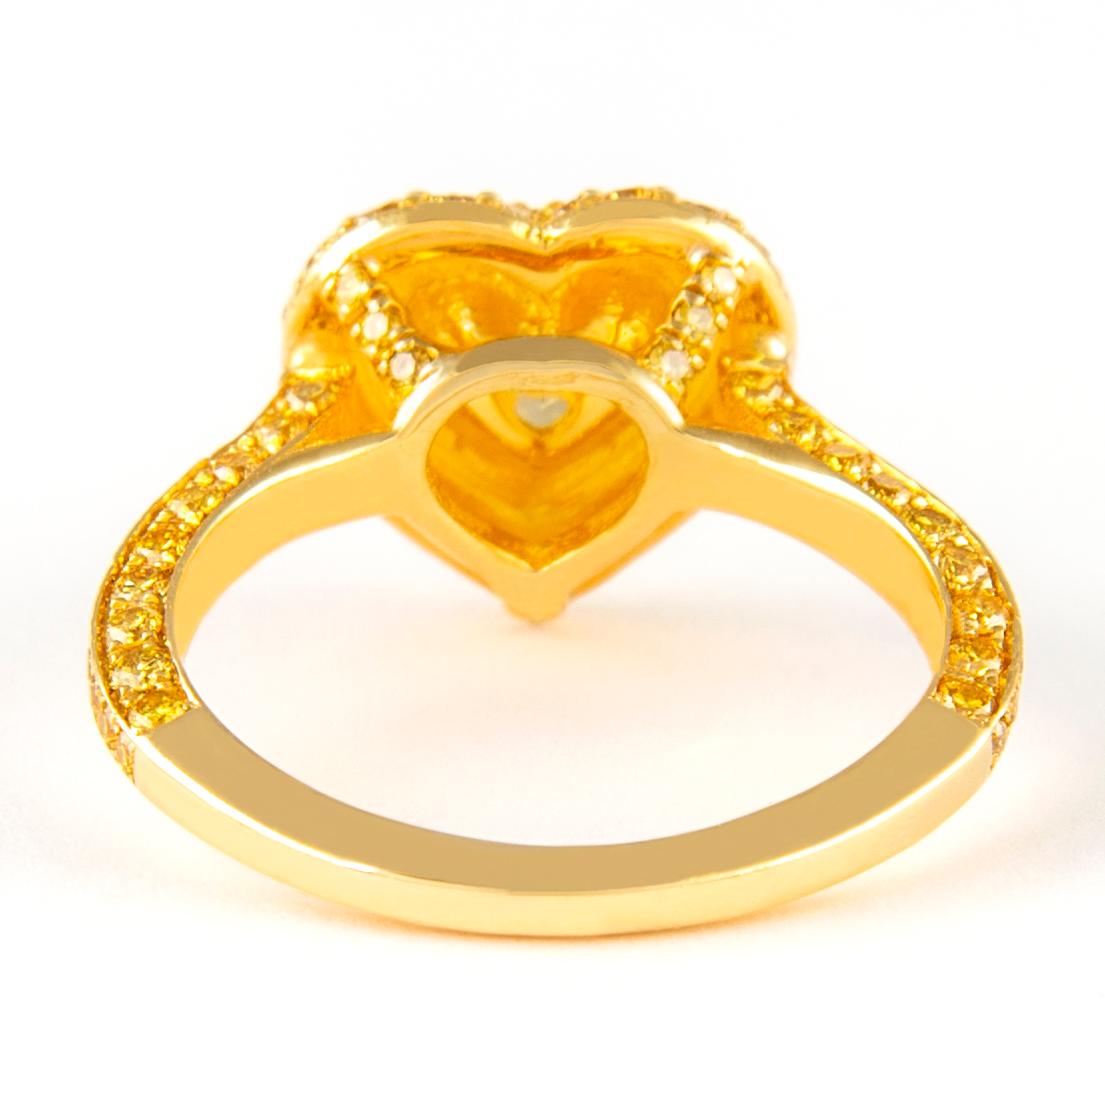 Alexander GIA 1.92ctt Fancy Intense Yellow Heart Diamond with Halo Ring 18k In New Condition For Sale In BEVERLY HILLS, CA